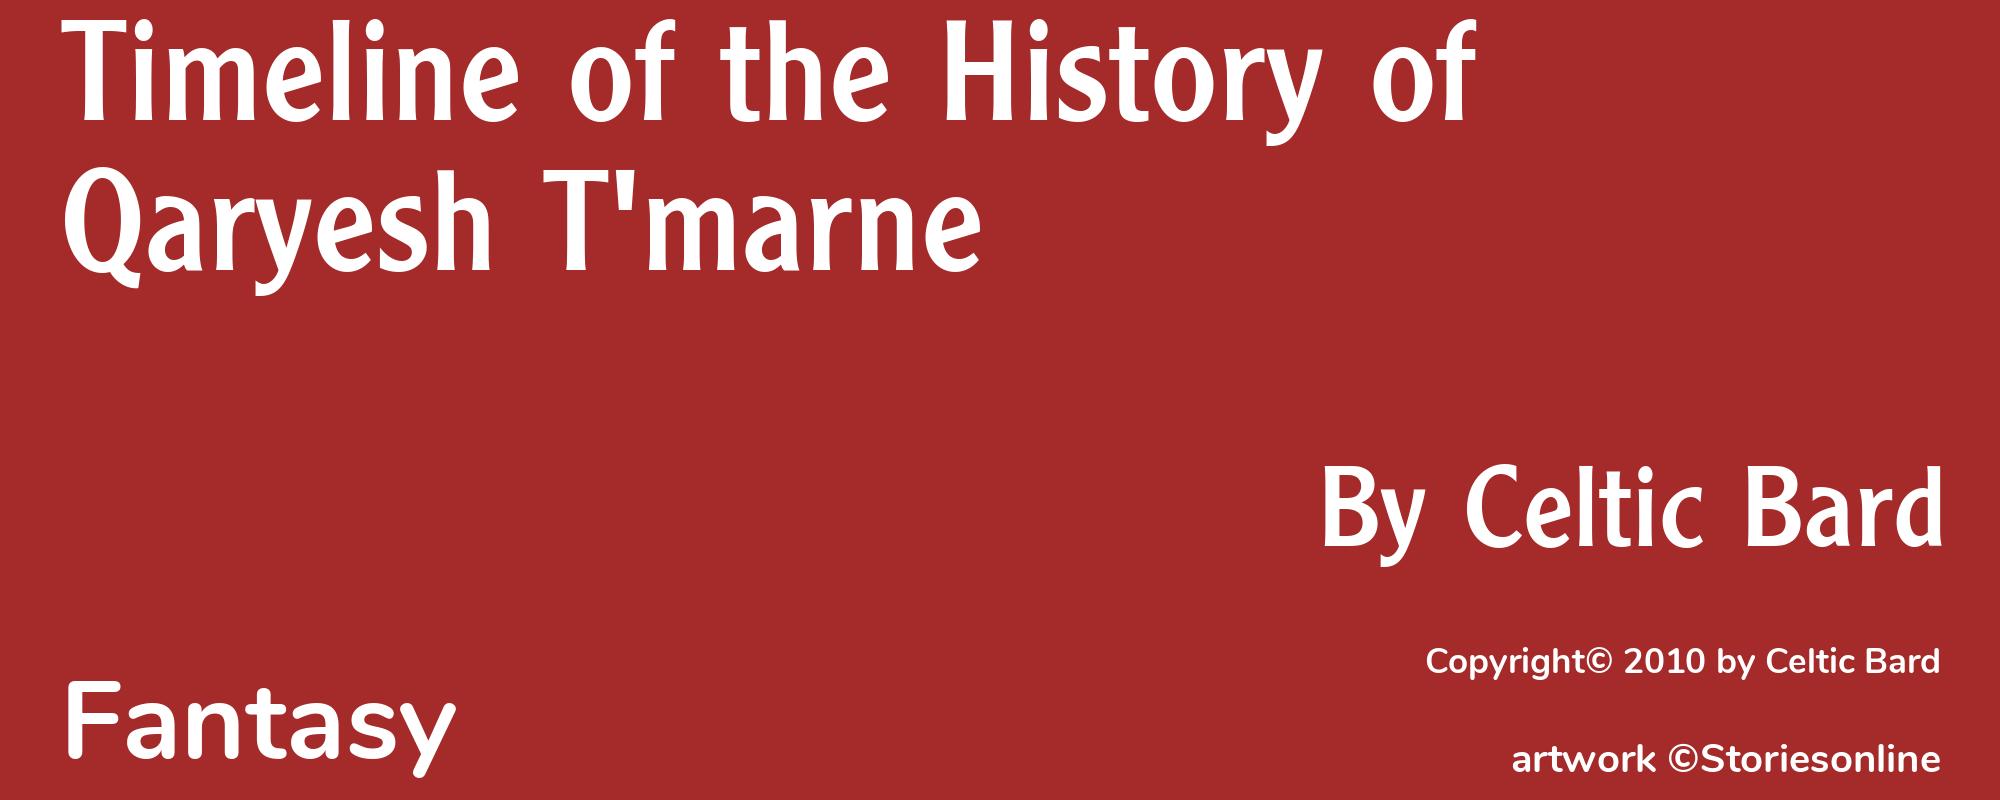 Timeline of the History of Qaryesh T'marne - Cover